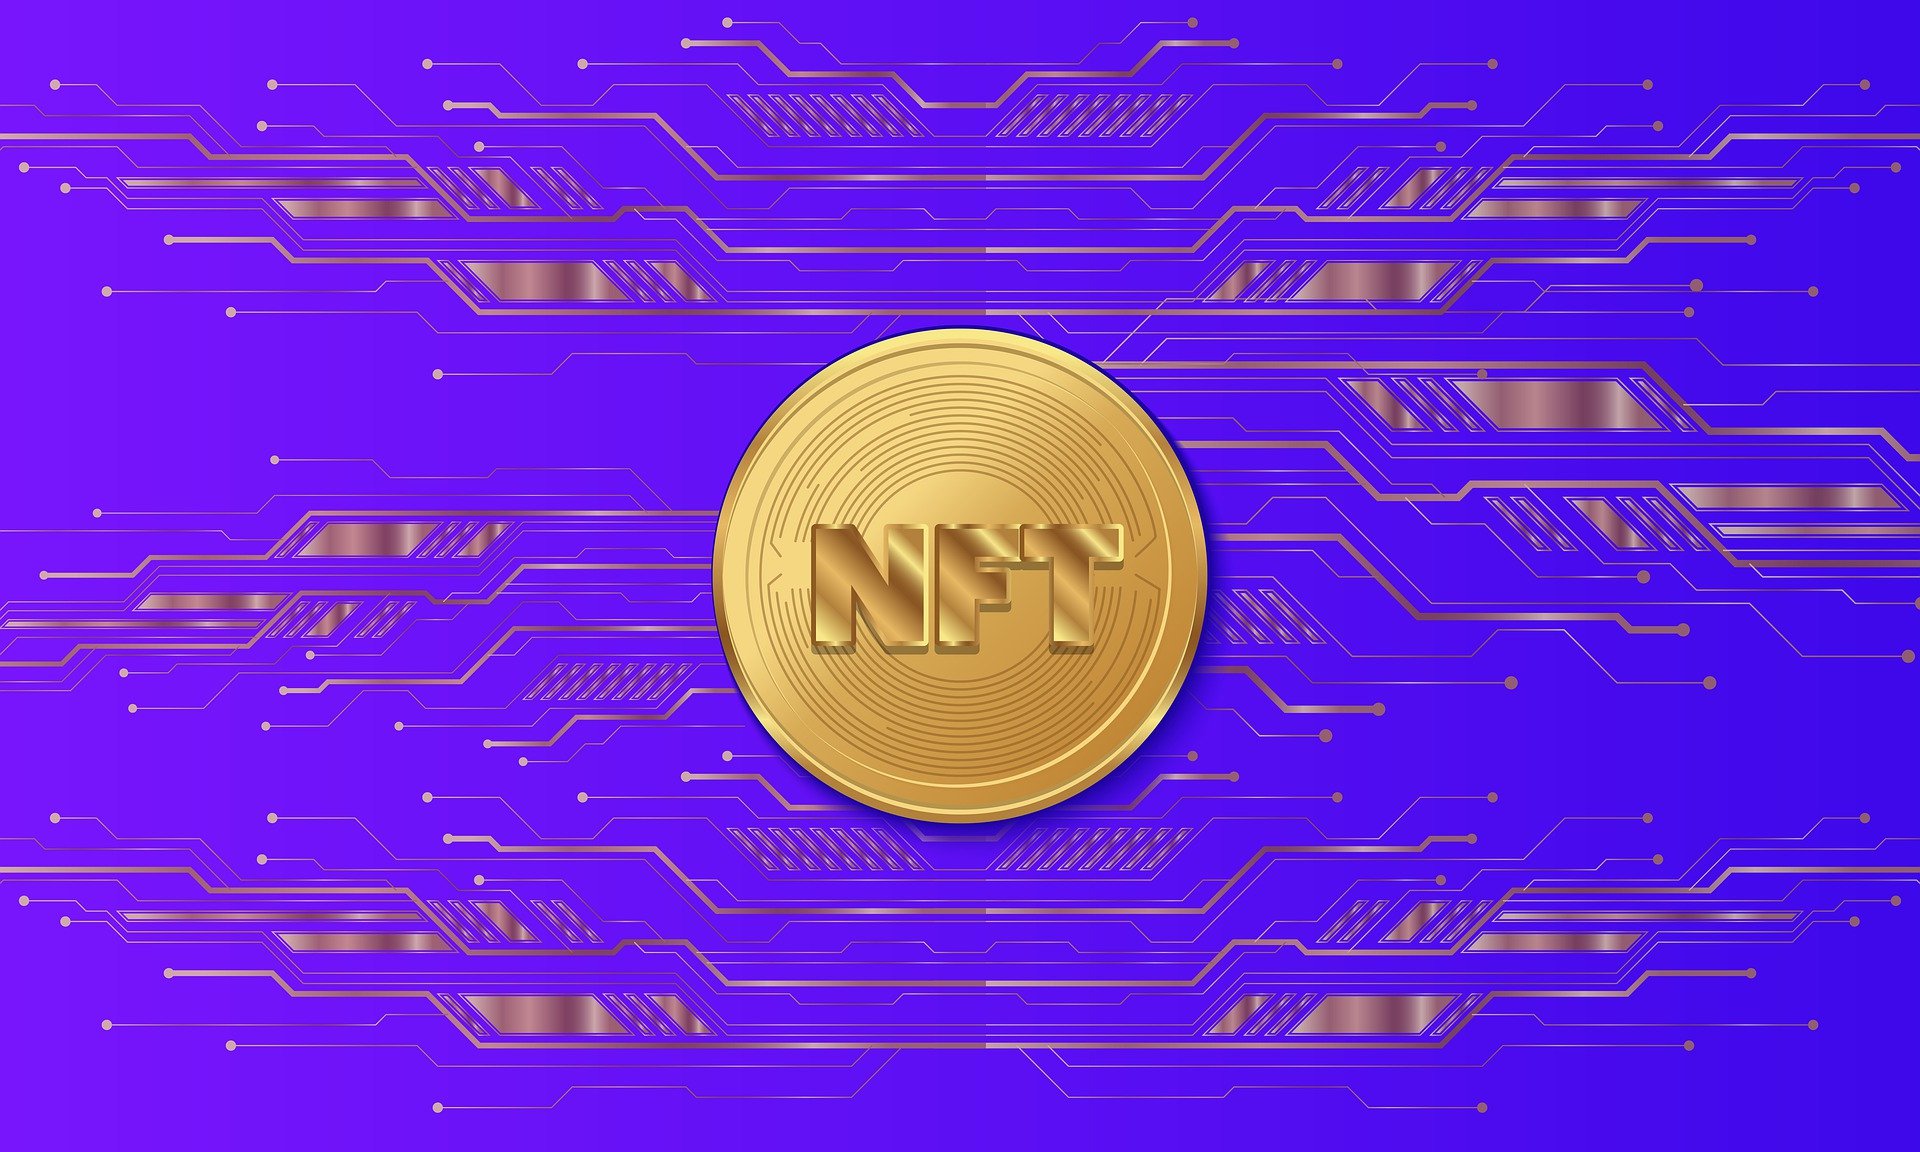 A golden NFT coin on a purple background